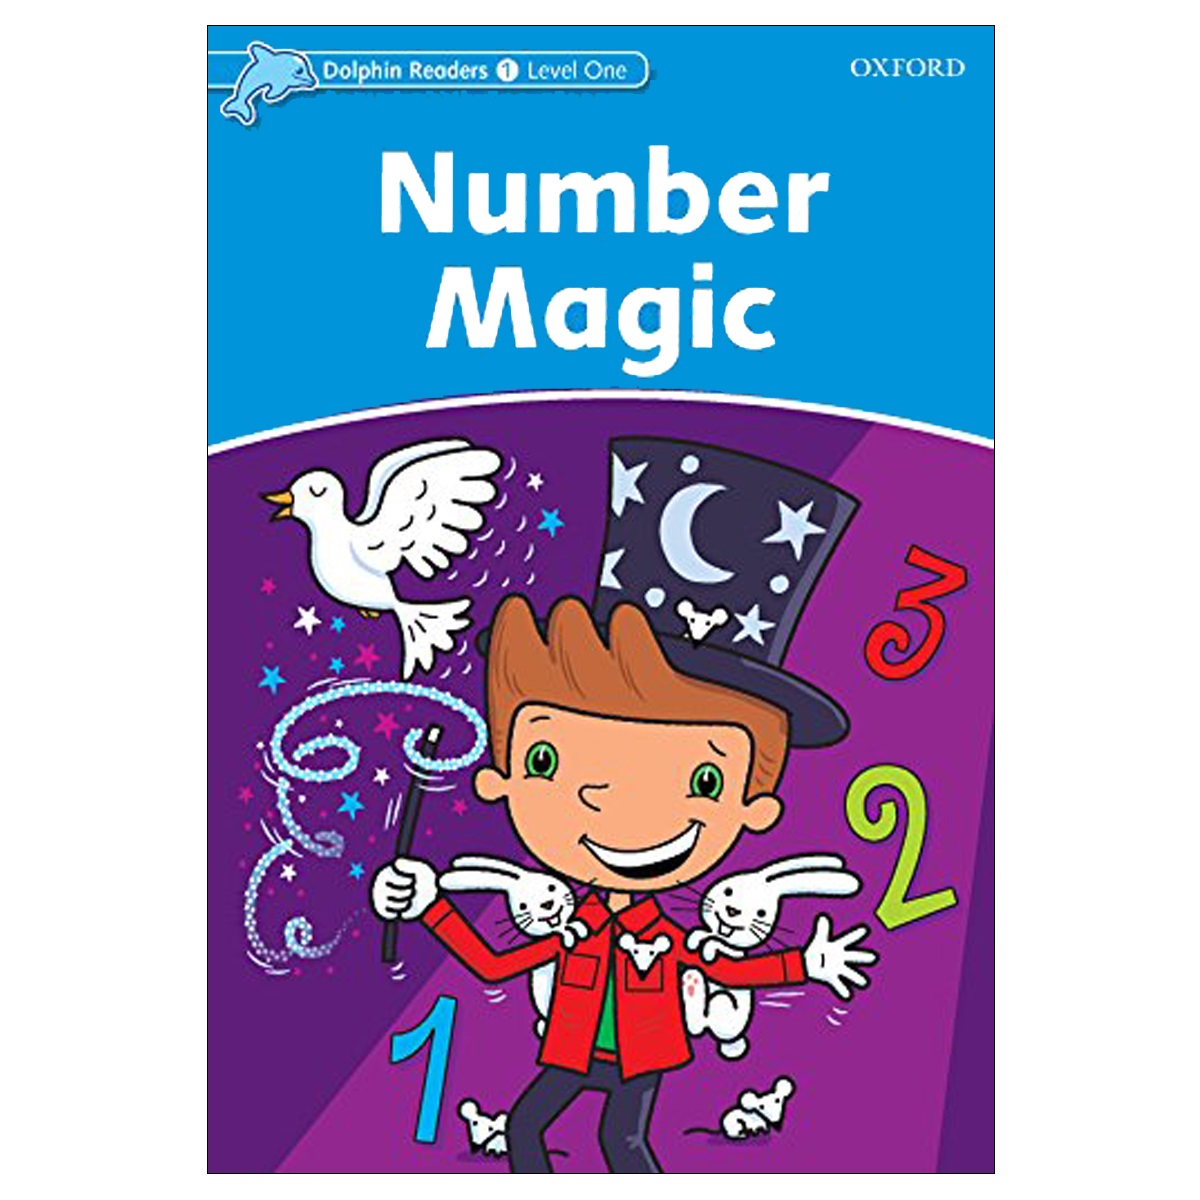 Number Magic_Dolphin Readers